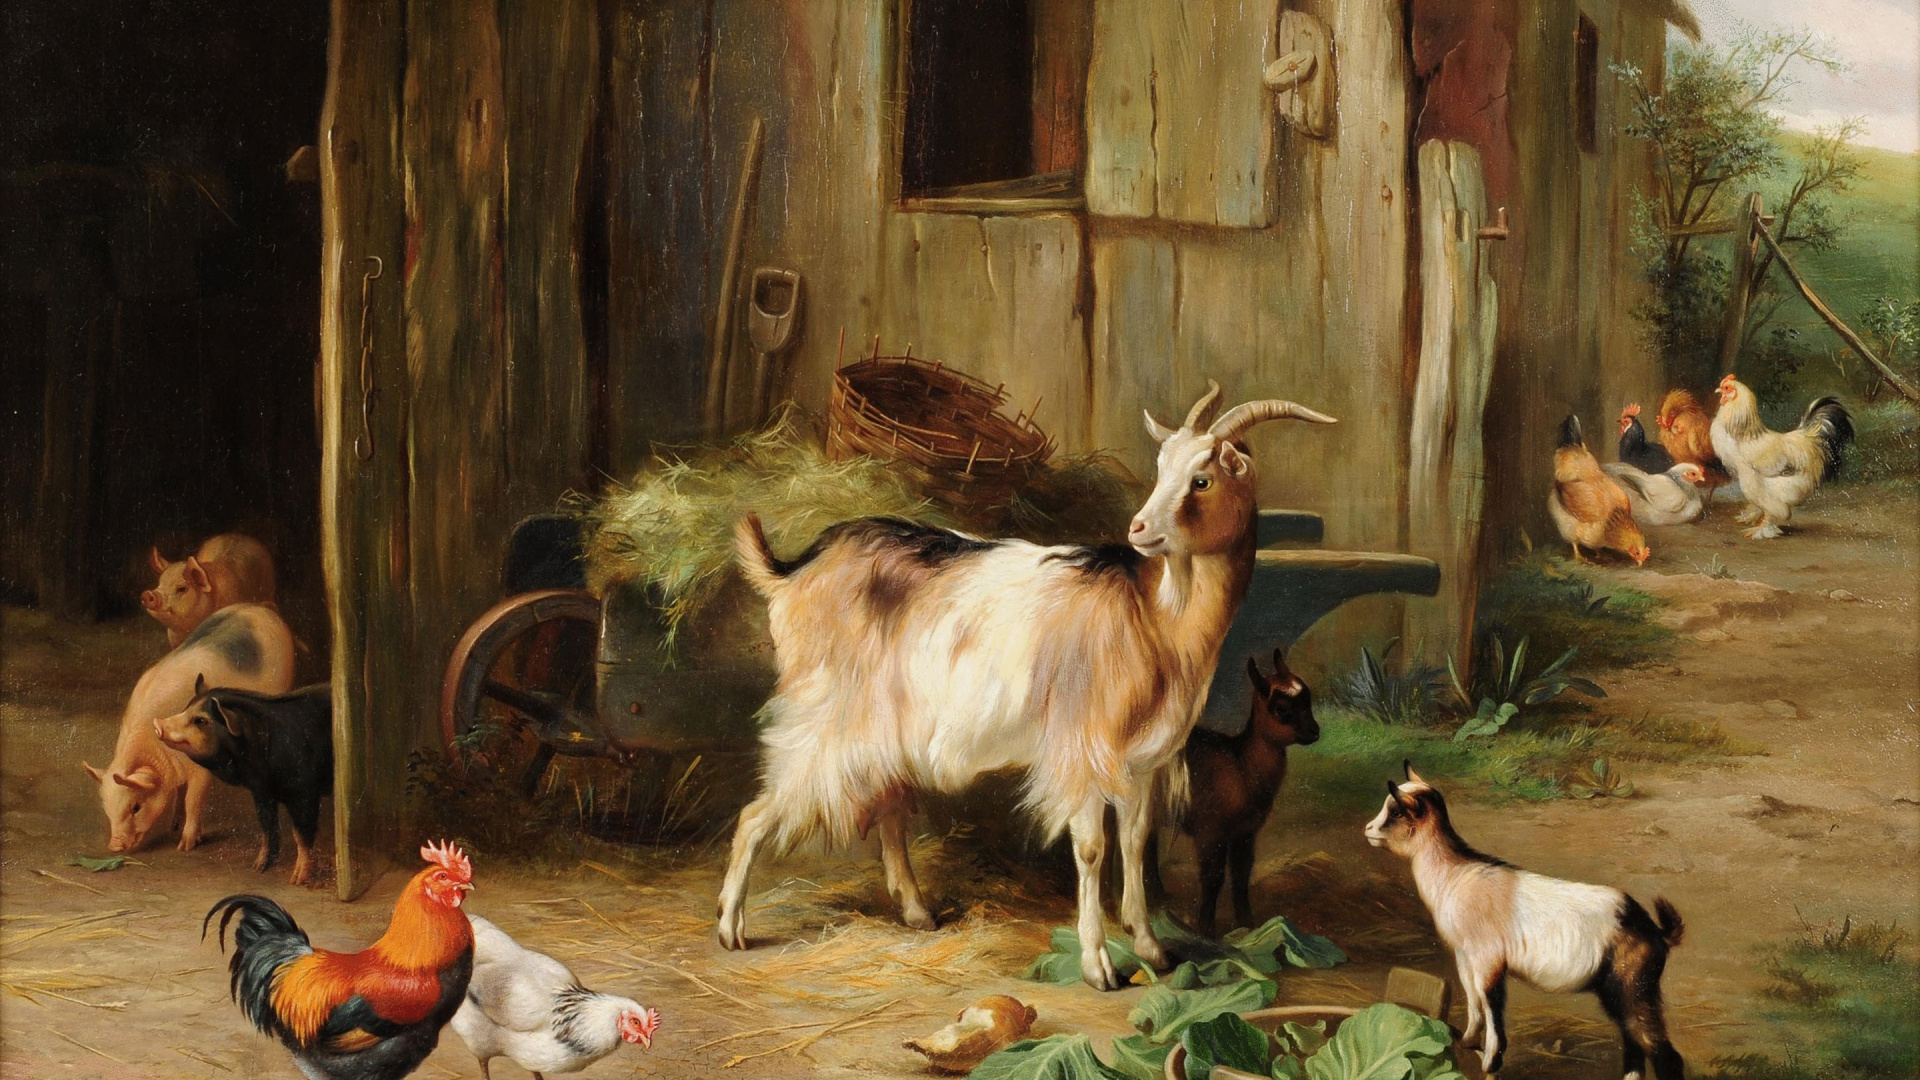 White and Brown Goats on Brown Wooden Cage. Wallpaper in 1920x1080 Resolution